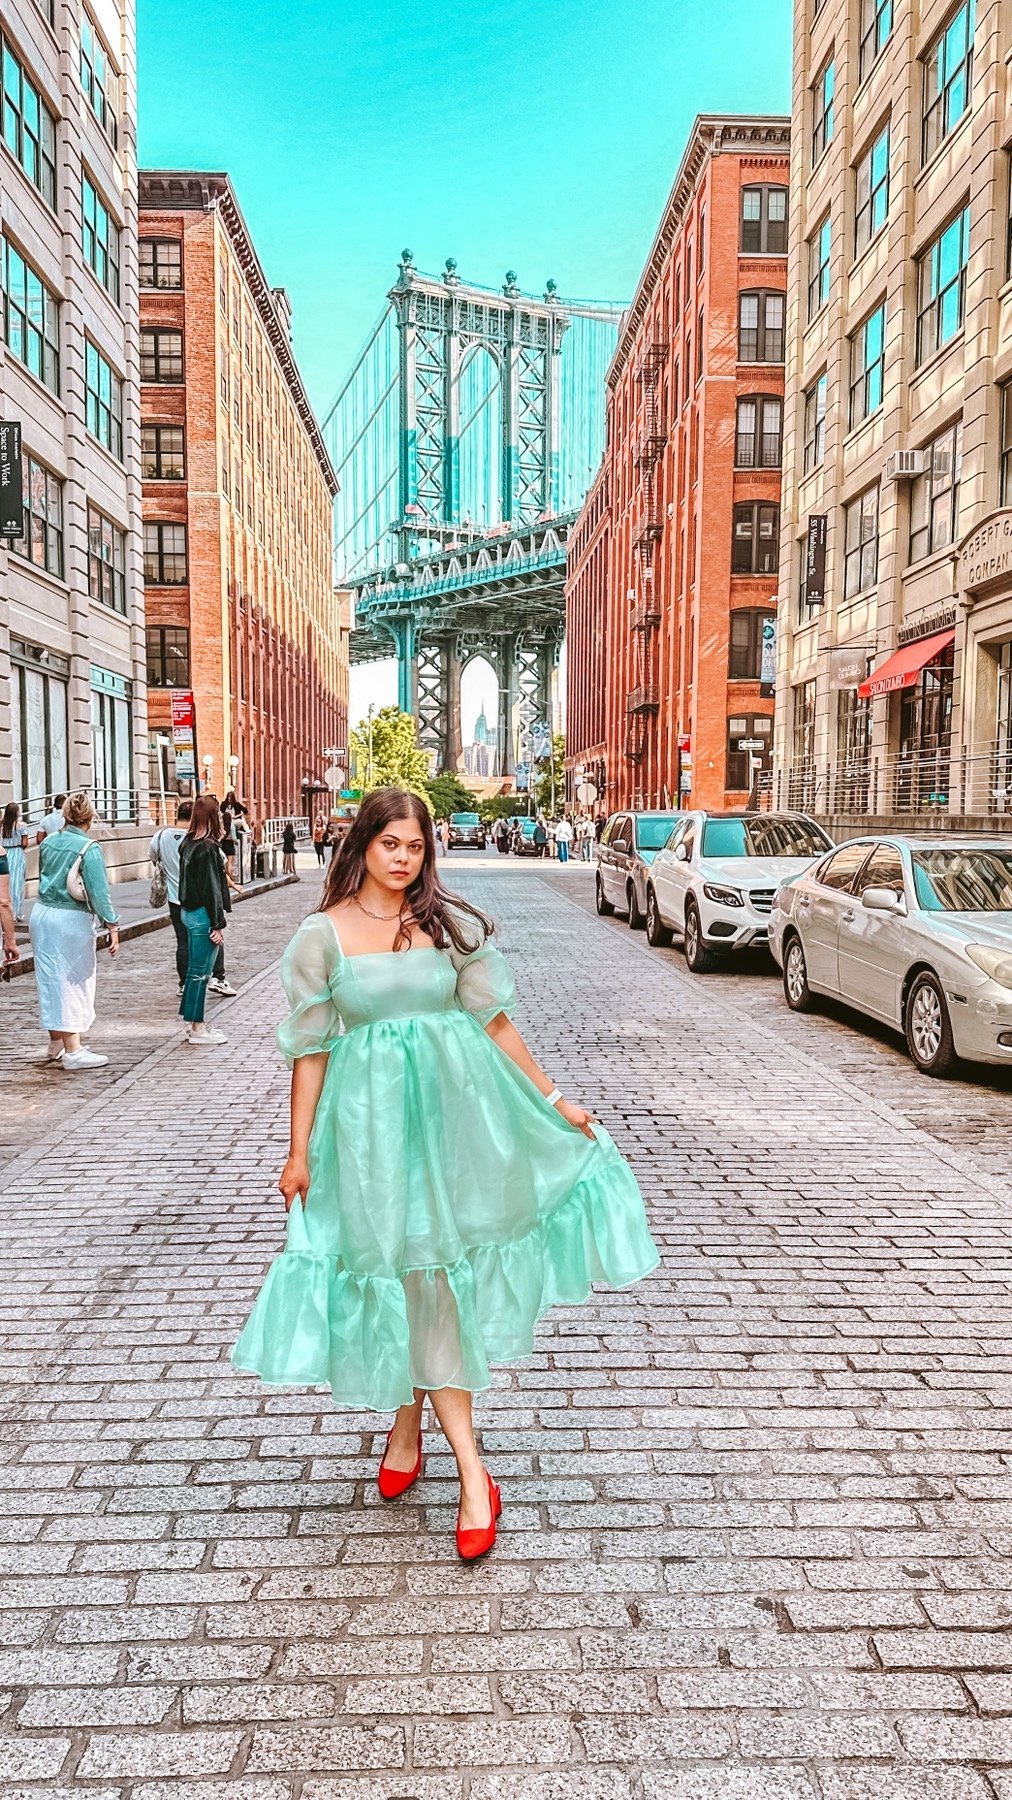 A picture of a girl in a beautiful organza dress standing in front of the Manhattan Bridge photo spot in the DUMBO area of Brooklyn. Things to do in New York| Colour me in style 